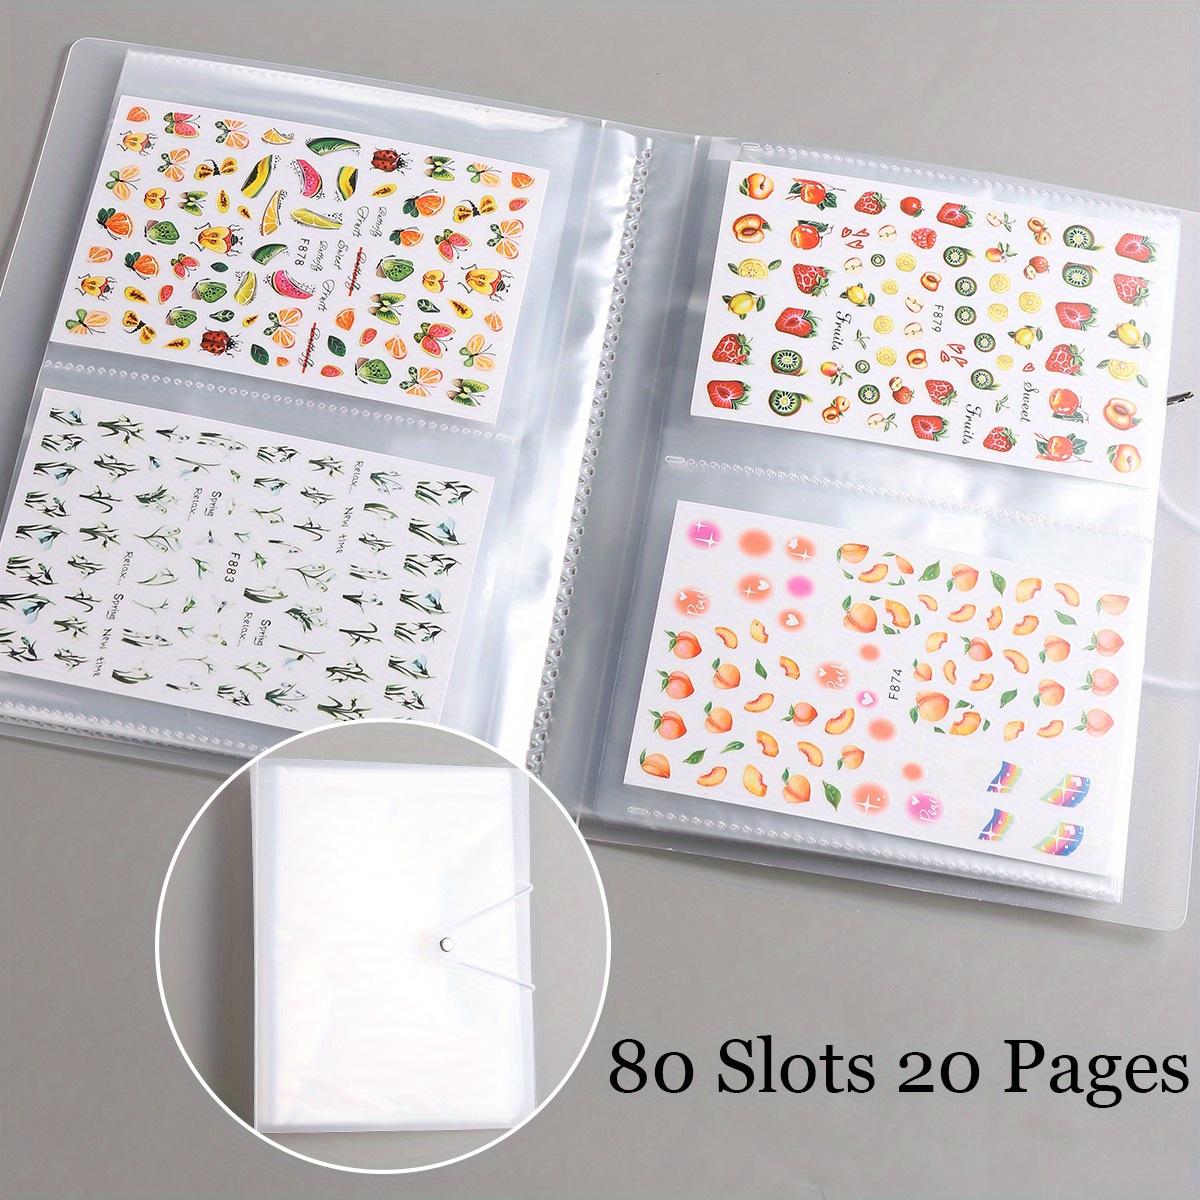 Nail Stickers Album with 80 Slots Collecting Decals Organizer